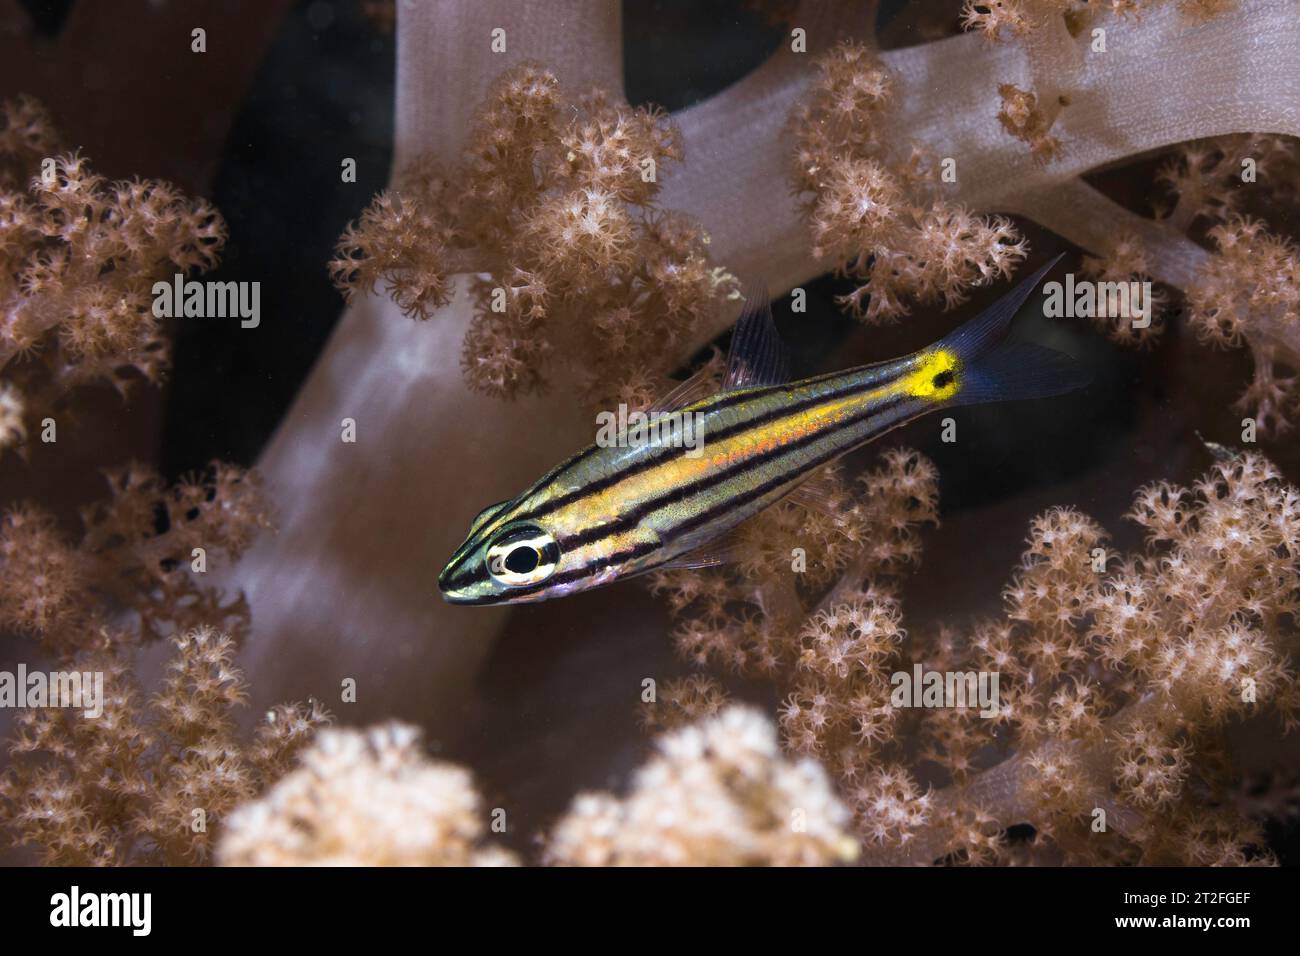 Macro of a Fiveline Cardinalfish (Cheilodipterus quinquelineatus) yellow to silver body with five black lines across its body, underwater on the coral Stock Photo